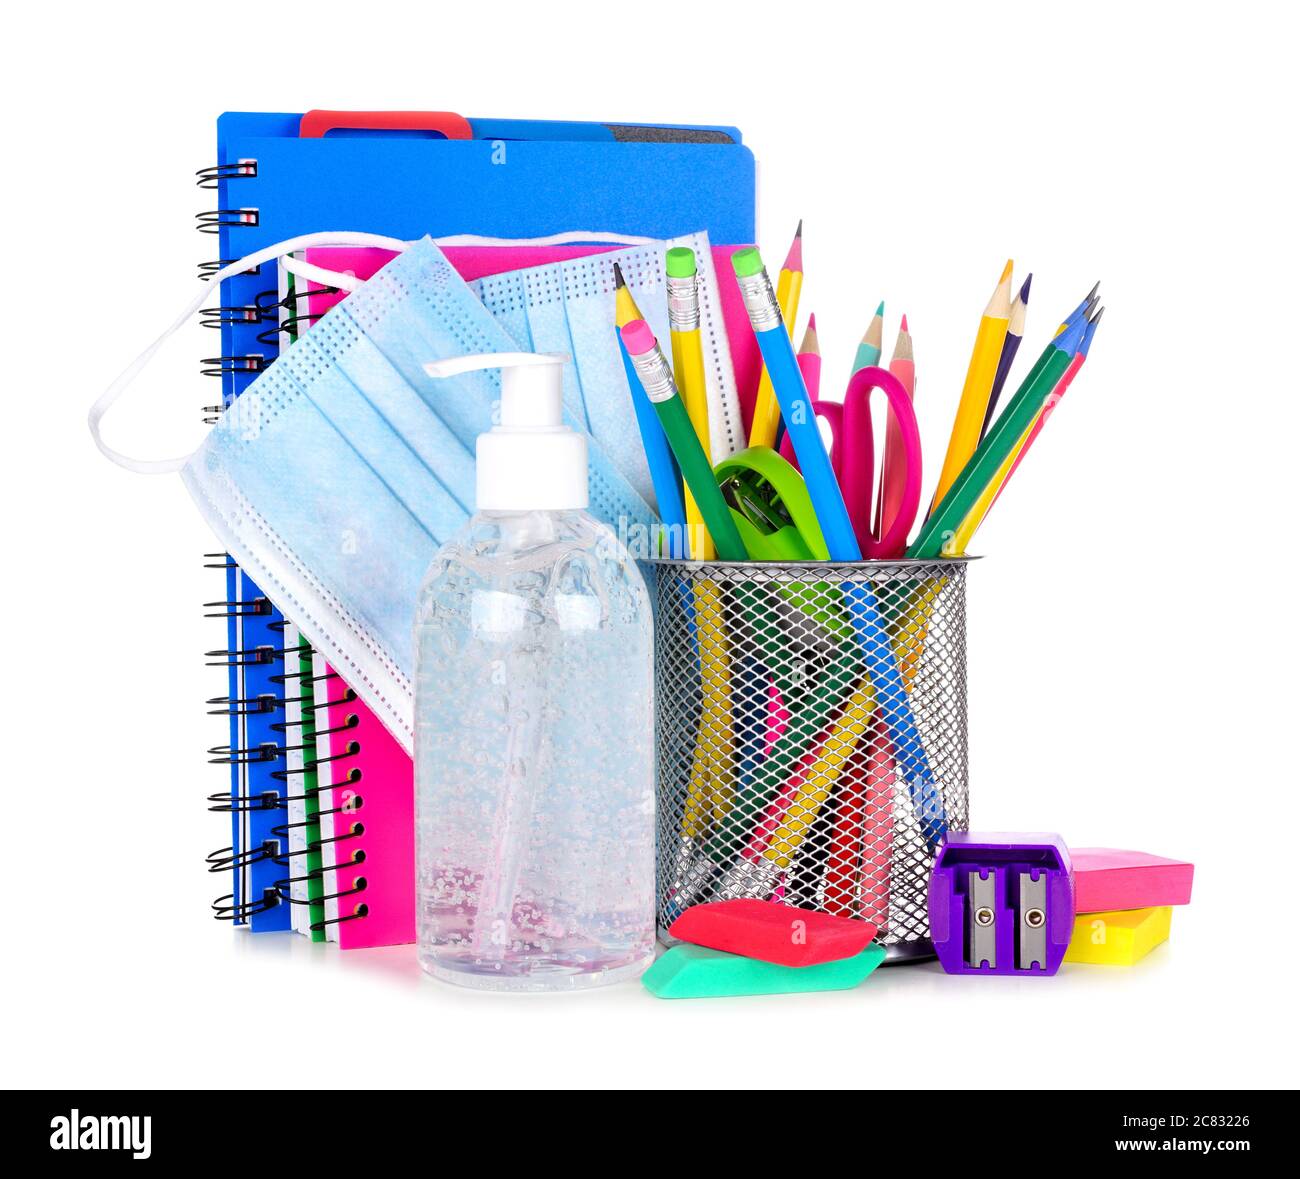 Group of school supplies and COVID 19 prevention items isolated on a white background. Back to school during pandemic concept. Stock Photo